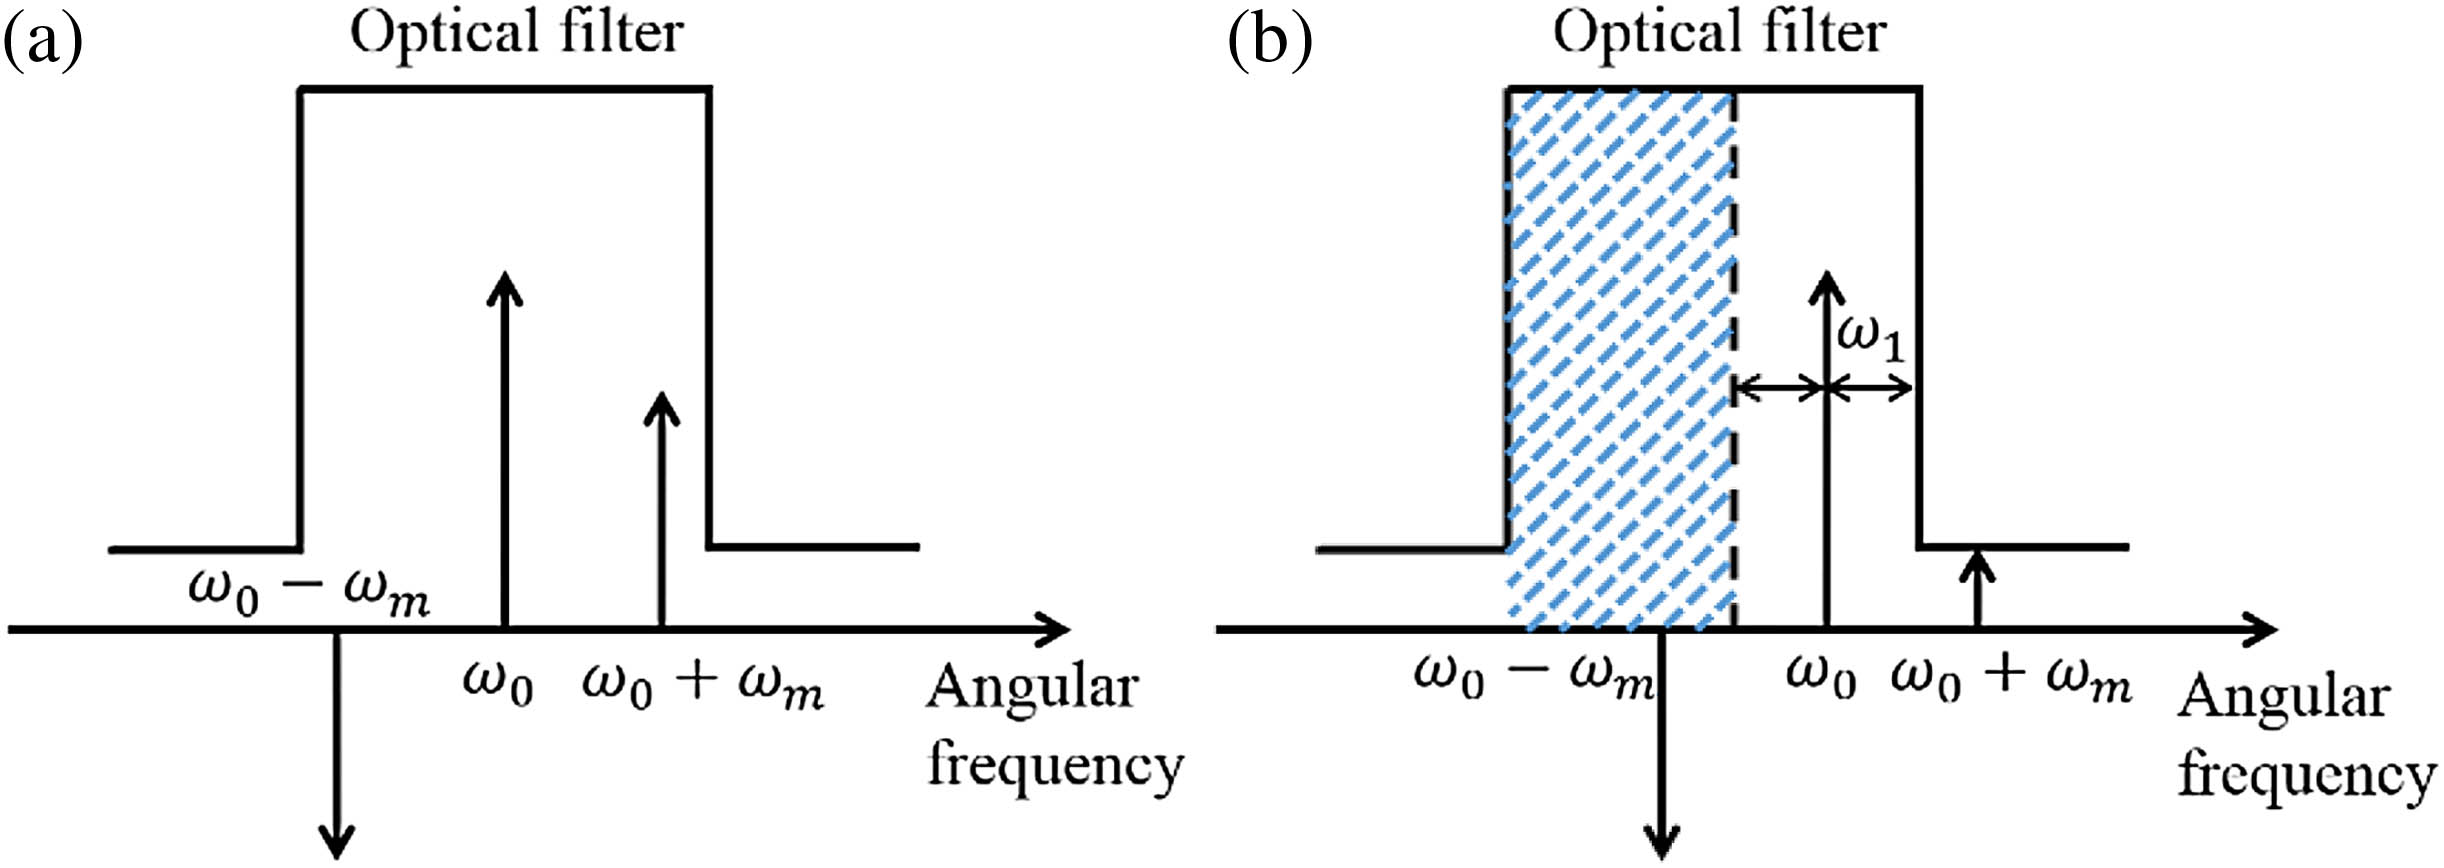 Optical spectra of the phase-modulated signal and the flattop optical filter when the frequency of the optical carrier is tuned (a) aligned with the center of the optical filter and (b) away from the center of the optical filter.